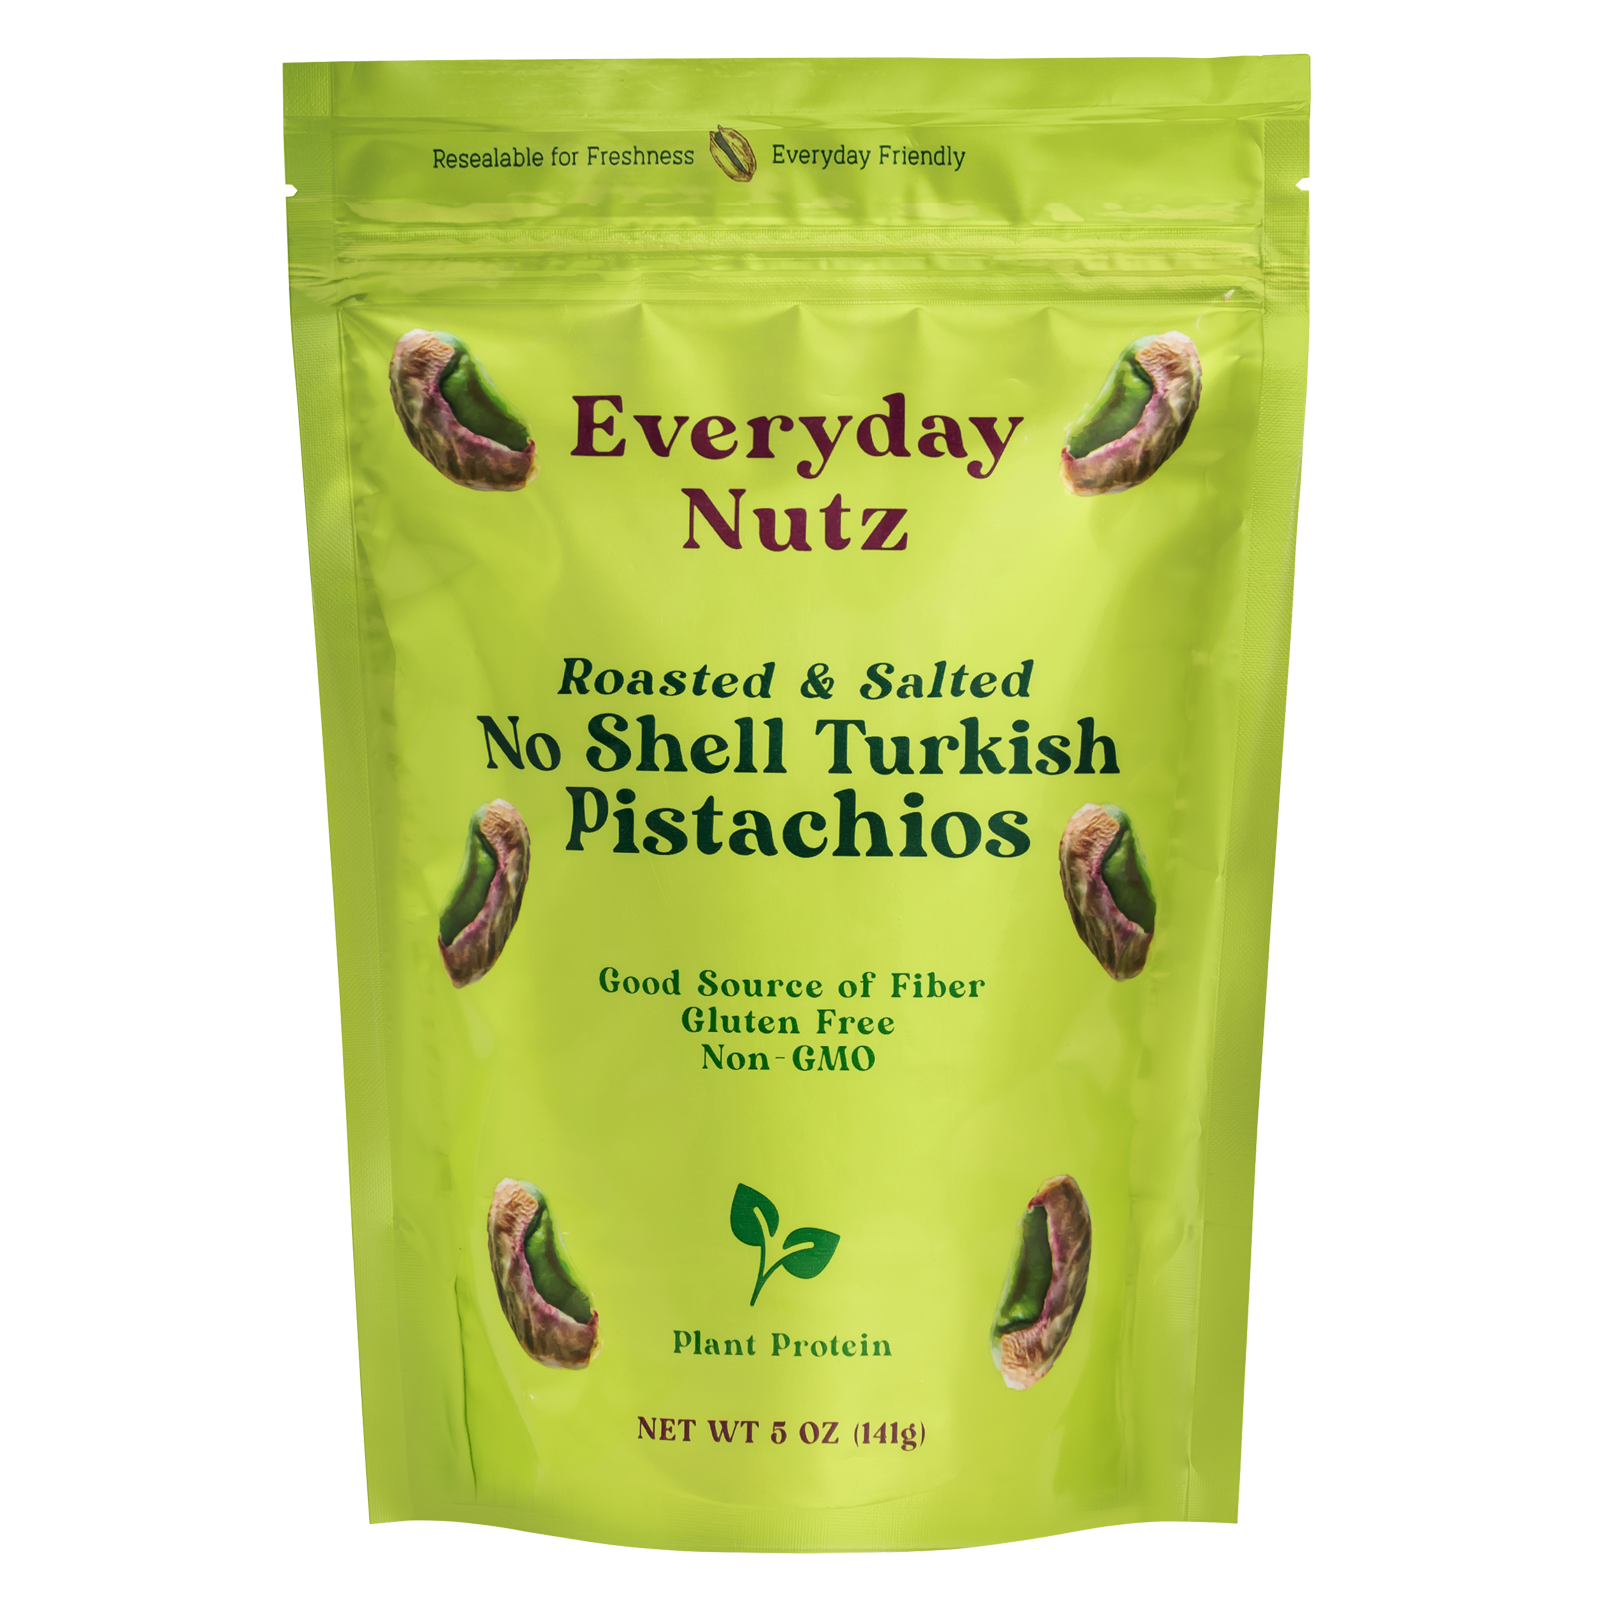 Everyday Nutz Roasted & Salted Pistachios without Shell 5oz